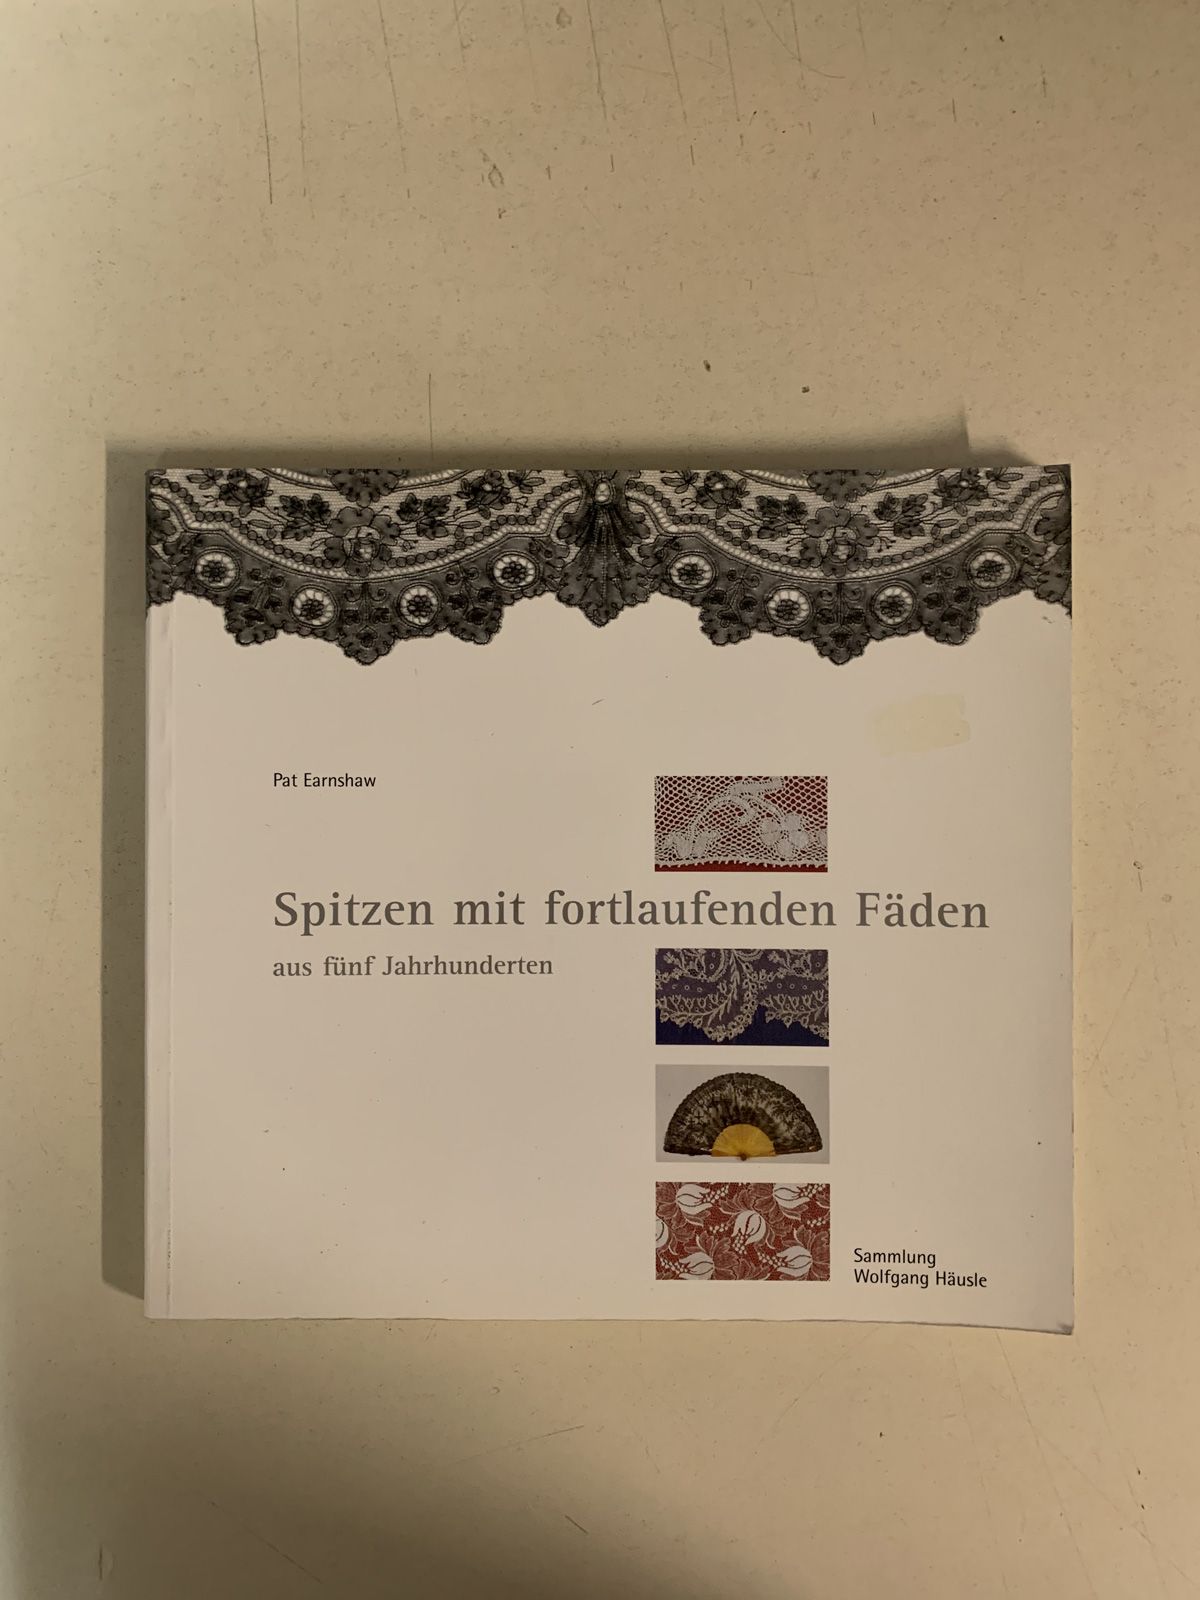 Null Thirteen books in German on lace techniques.
Three books on lace, including&hellip;